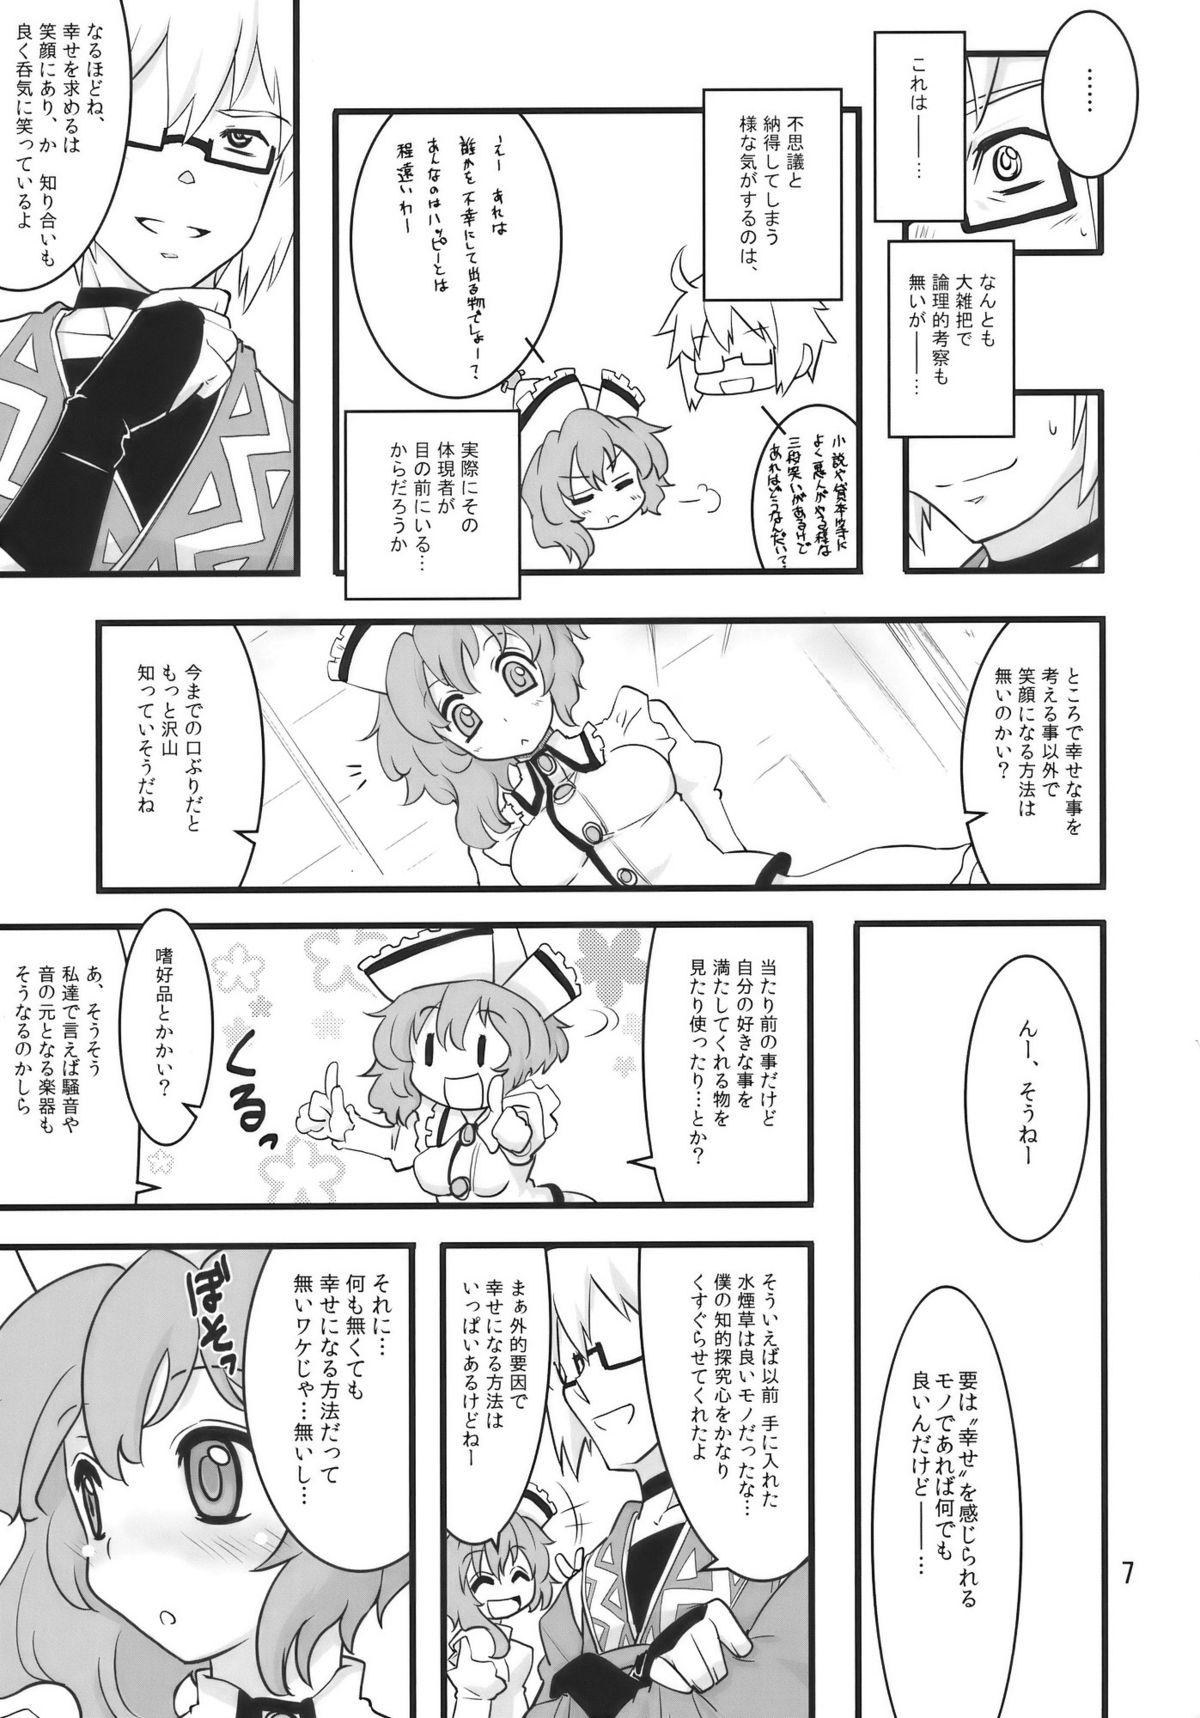 Rimjob Happy Trigger - Touhou project Cfnm - Page 7